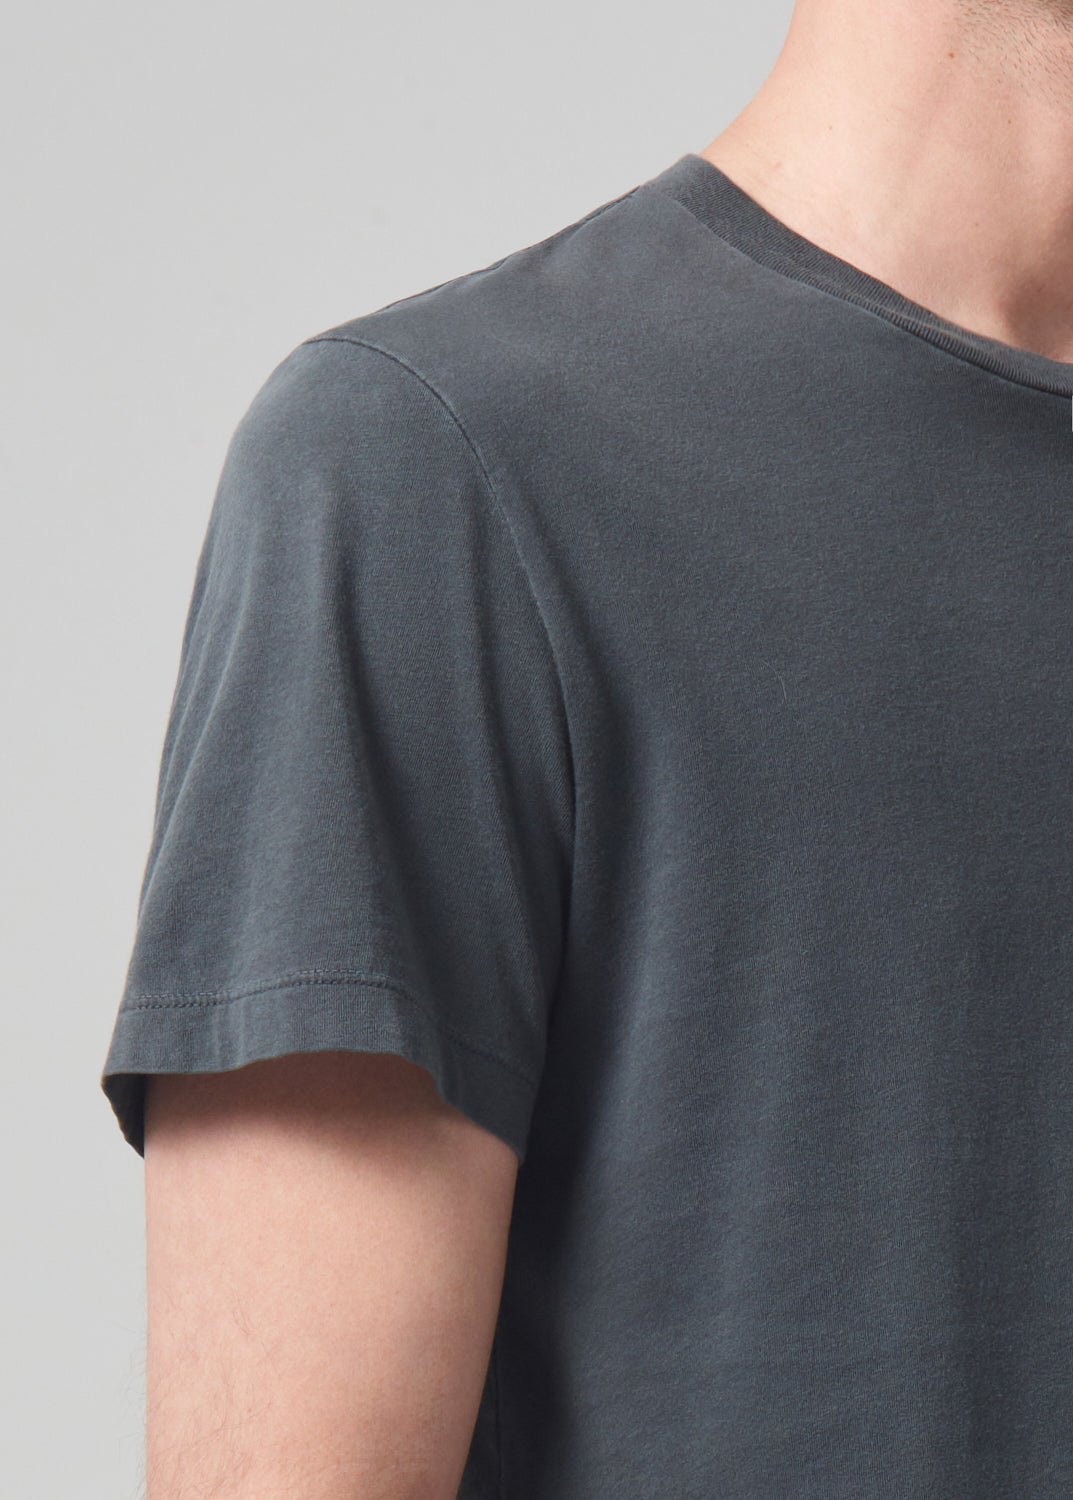 Everyday Short Sleeve Tee in Charcoal